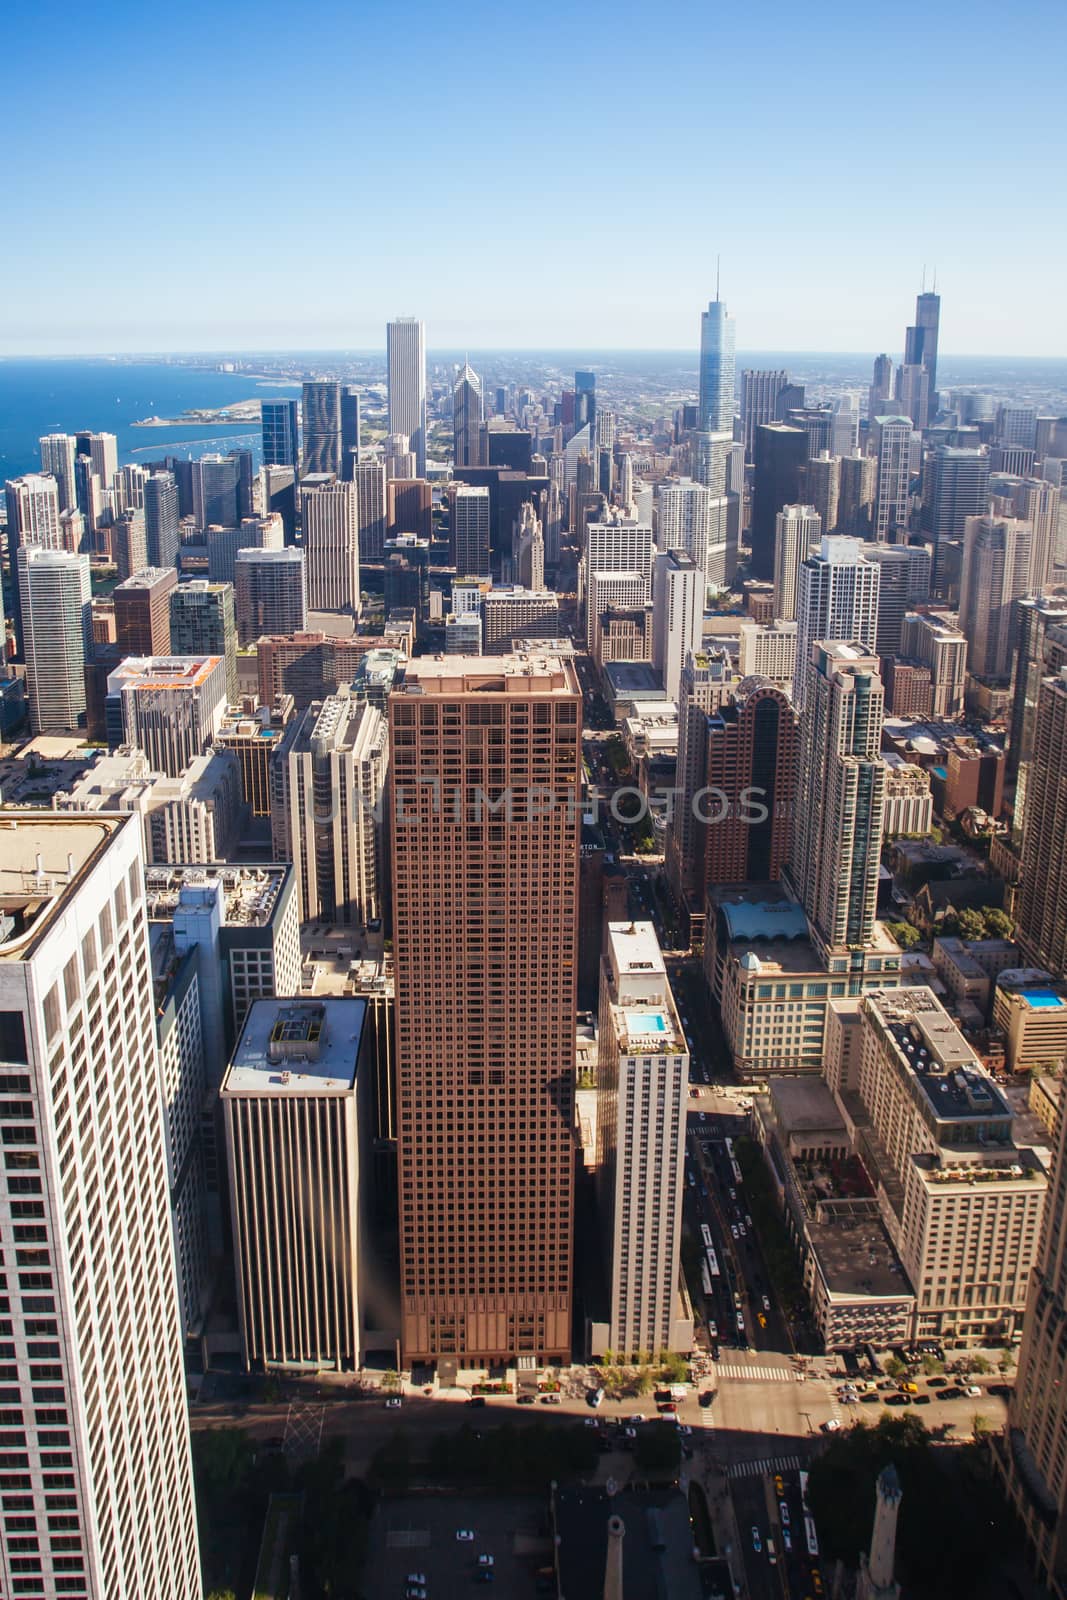 The expansive Chicago skyline on a hot clear summer day in Illinois, USA